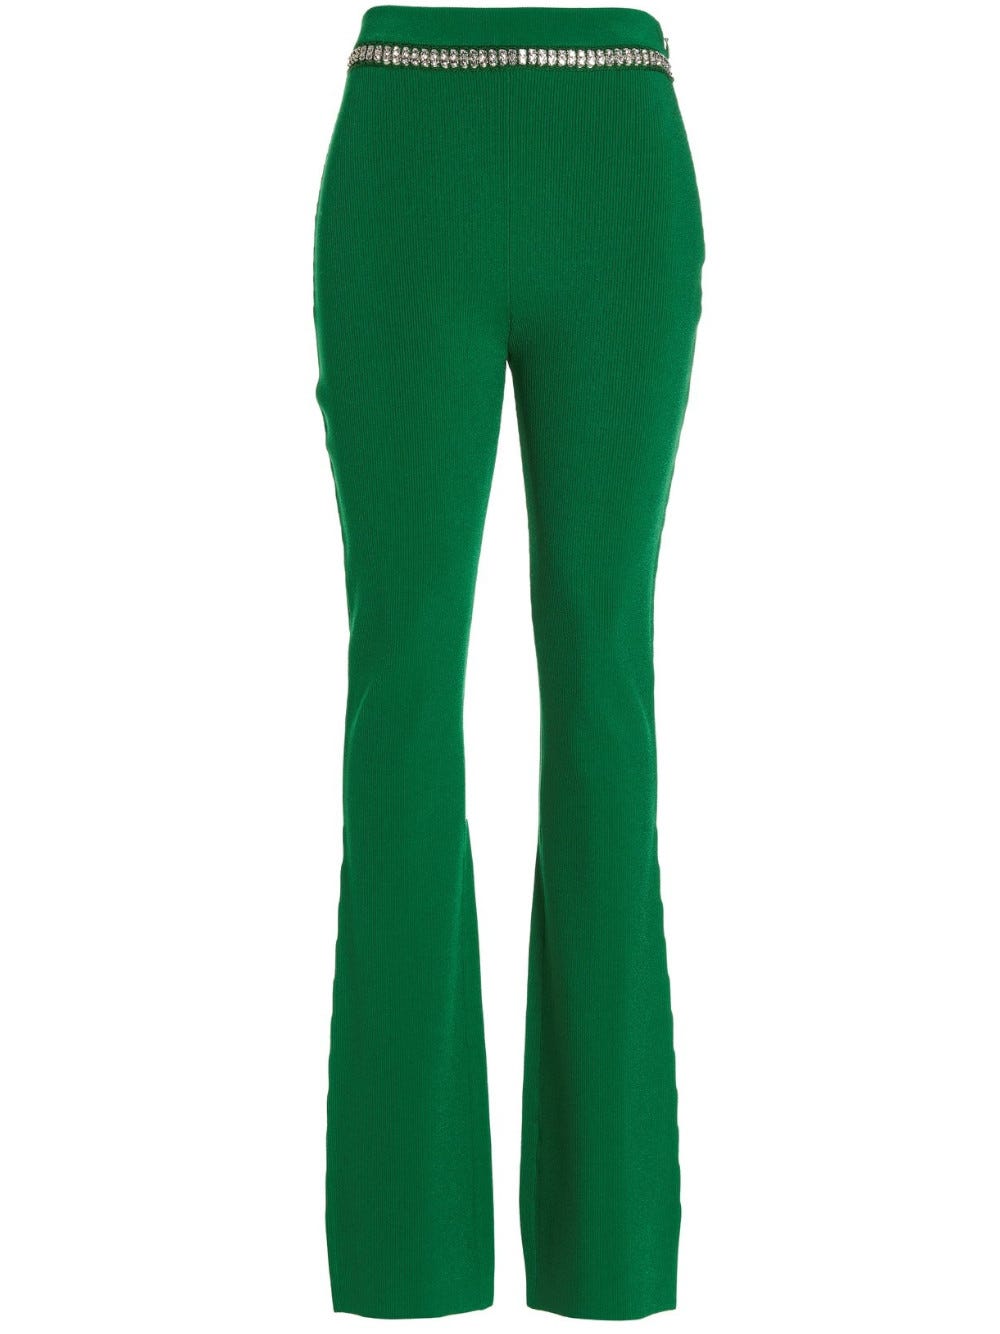 RABANNE GREEN RIBBED PANTS WITH JEWEL DETAIL AT WAISTBAND